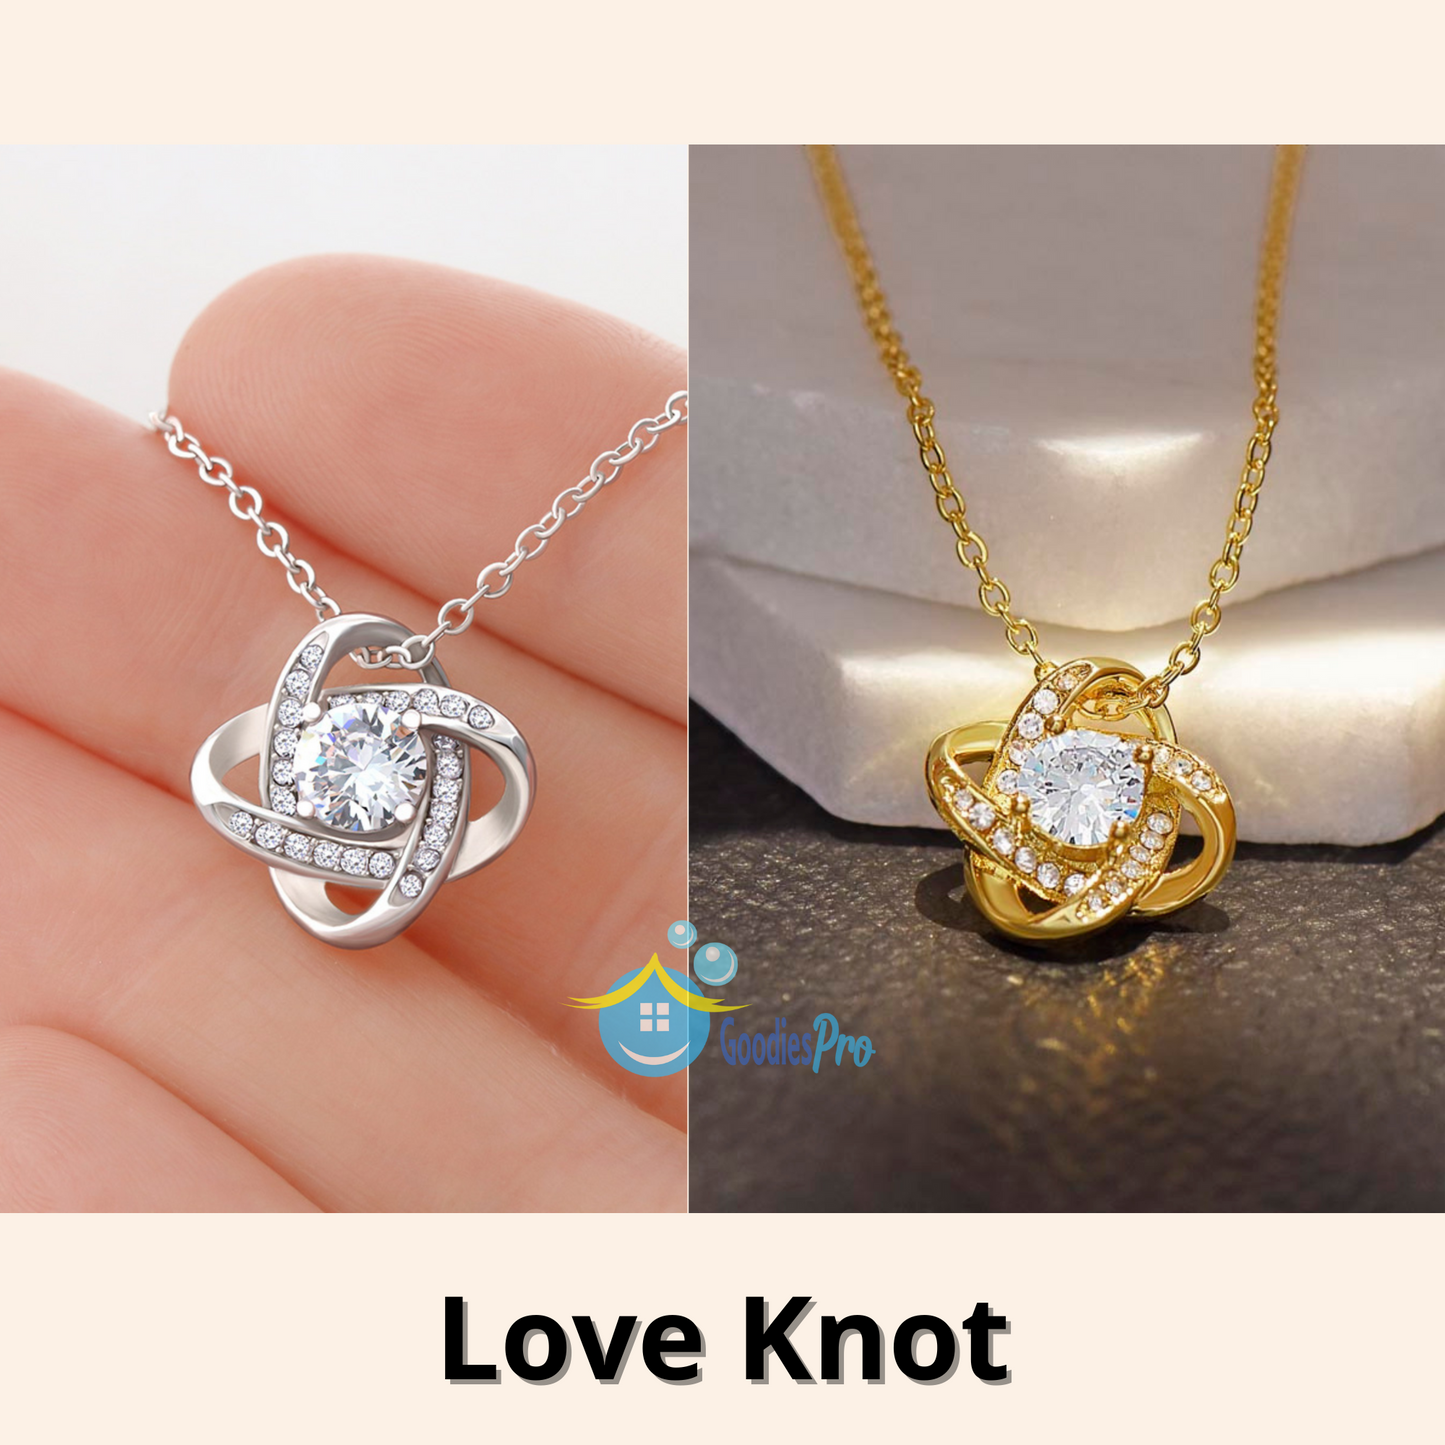 To My Mom Gift - Your are the only person in the world - Love Knot #e144